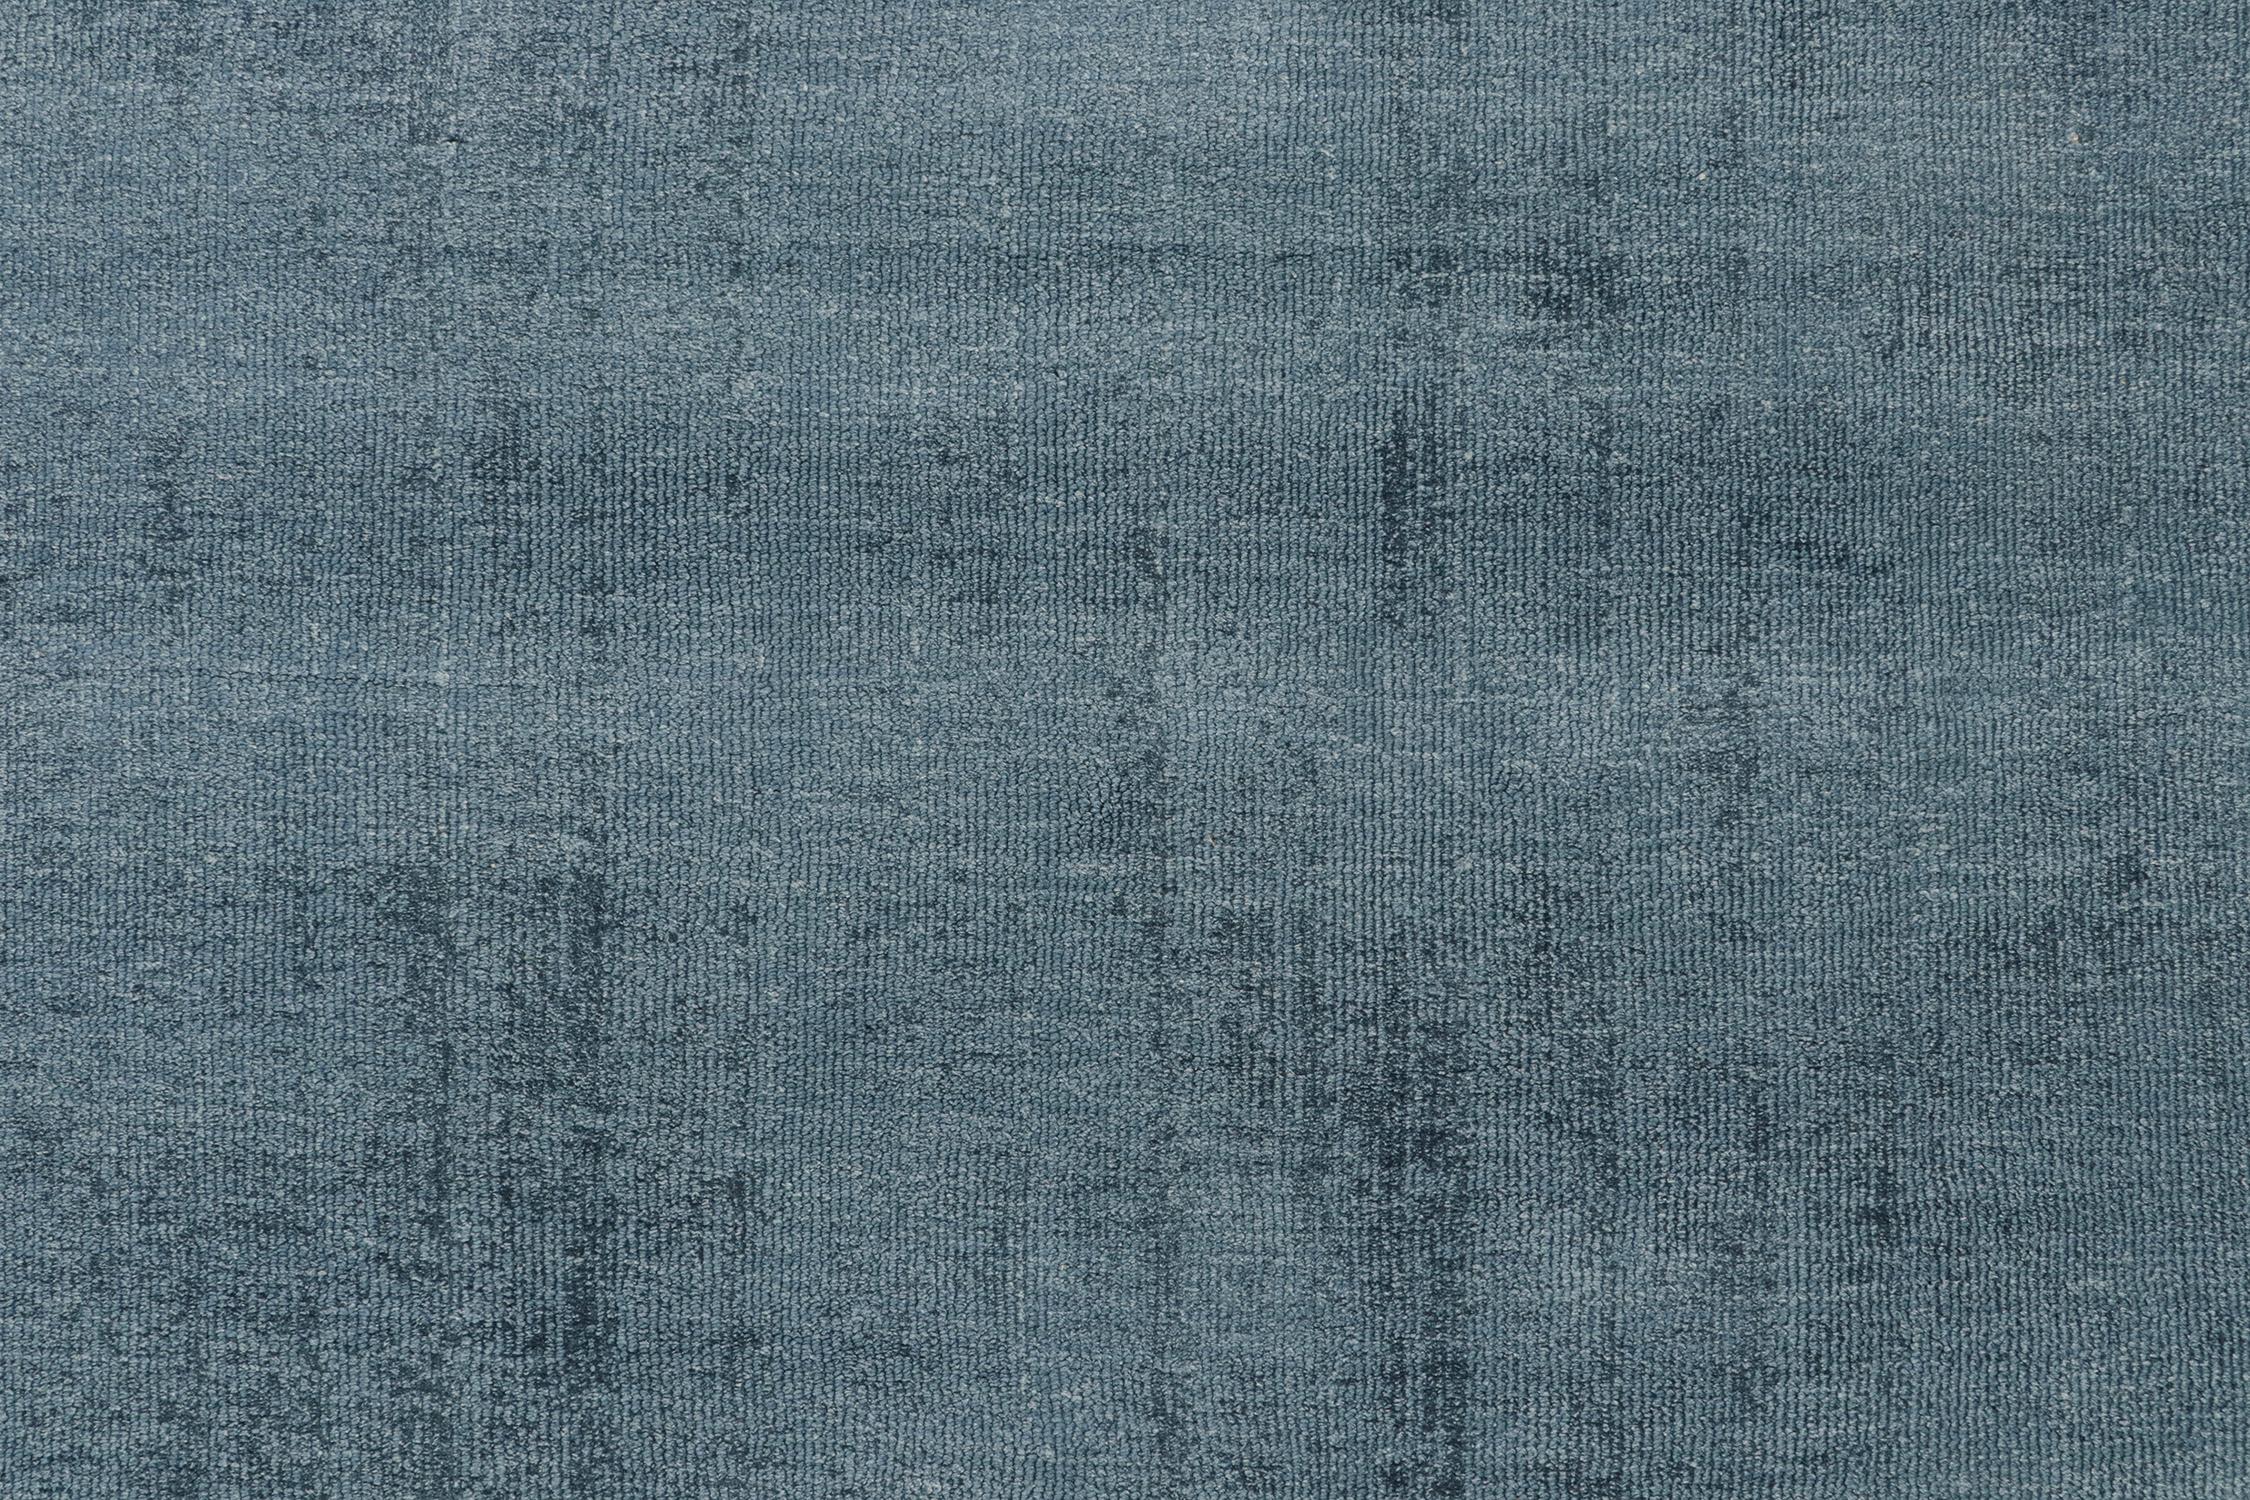 Rug & Kilim’s Modern Rug in Solid Blue Tone-on-tone Striae In New Condition For Sale In Long Island City, NY